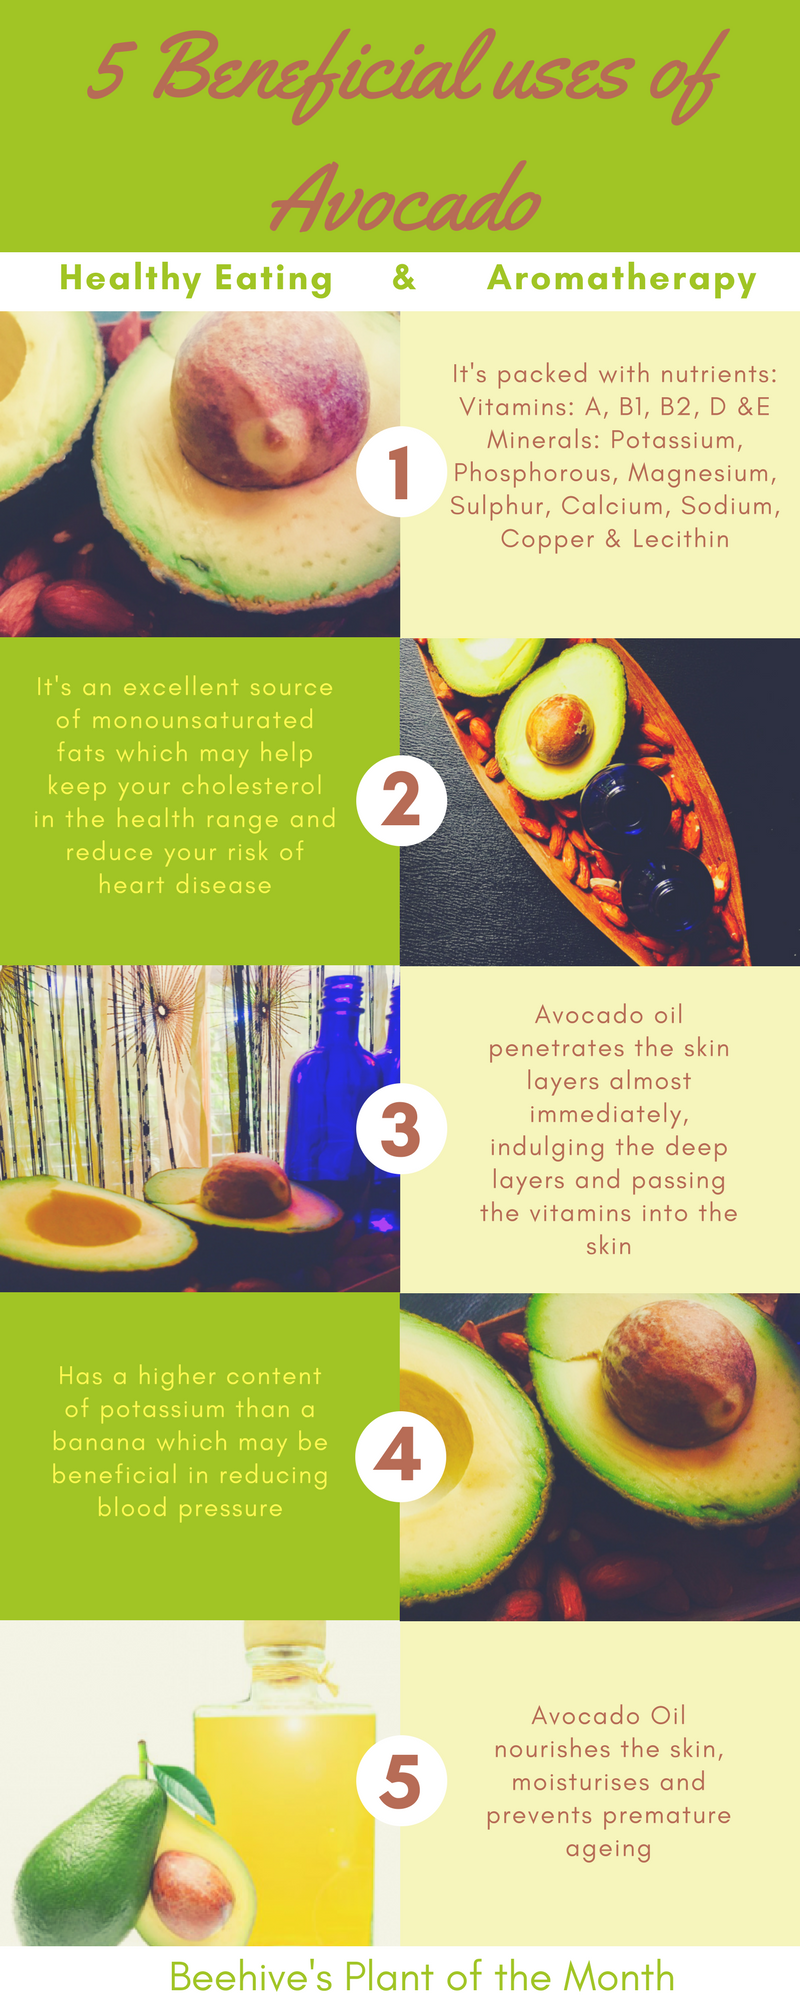 5 benefits of using avocado oil in aromatherapy and healty eating